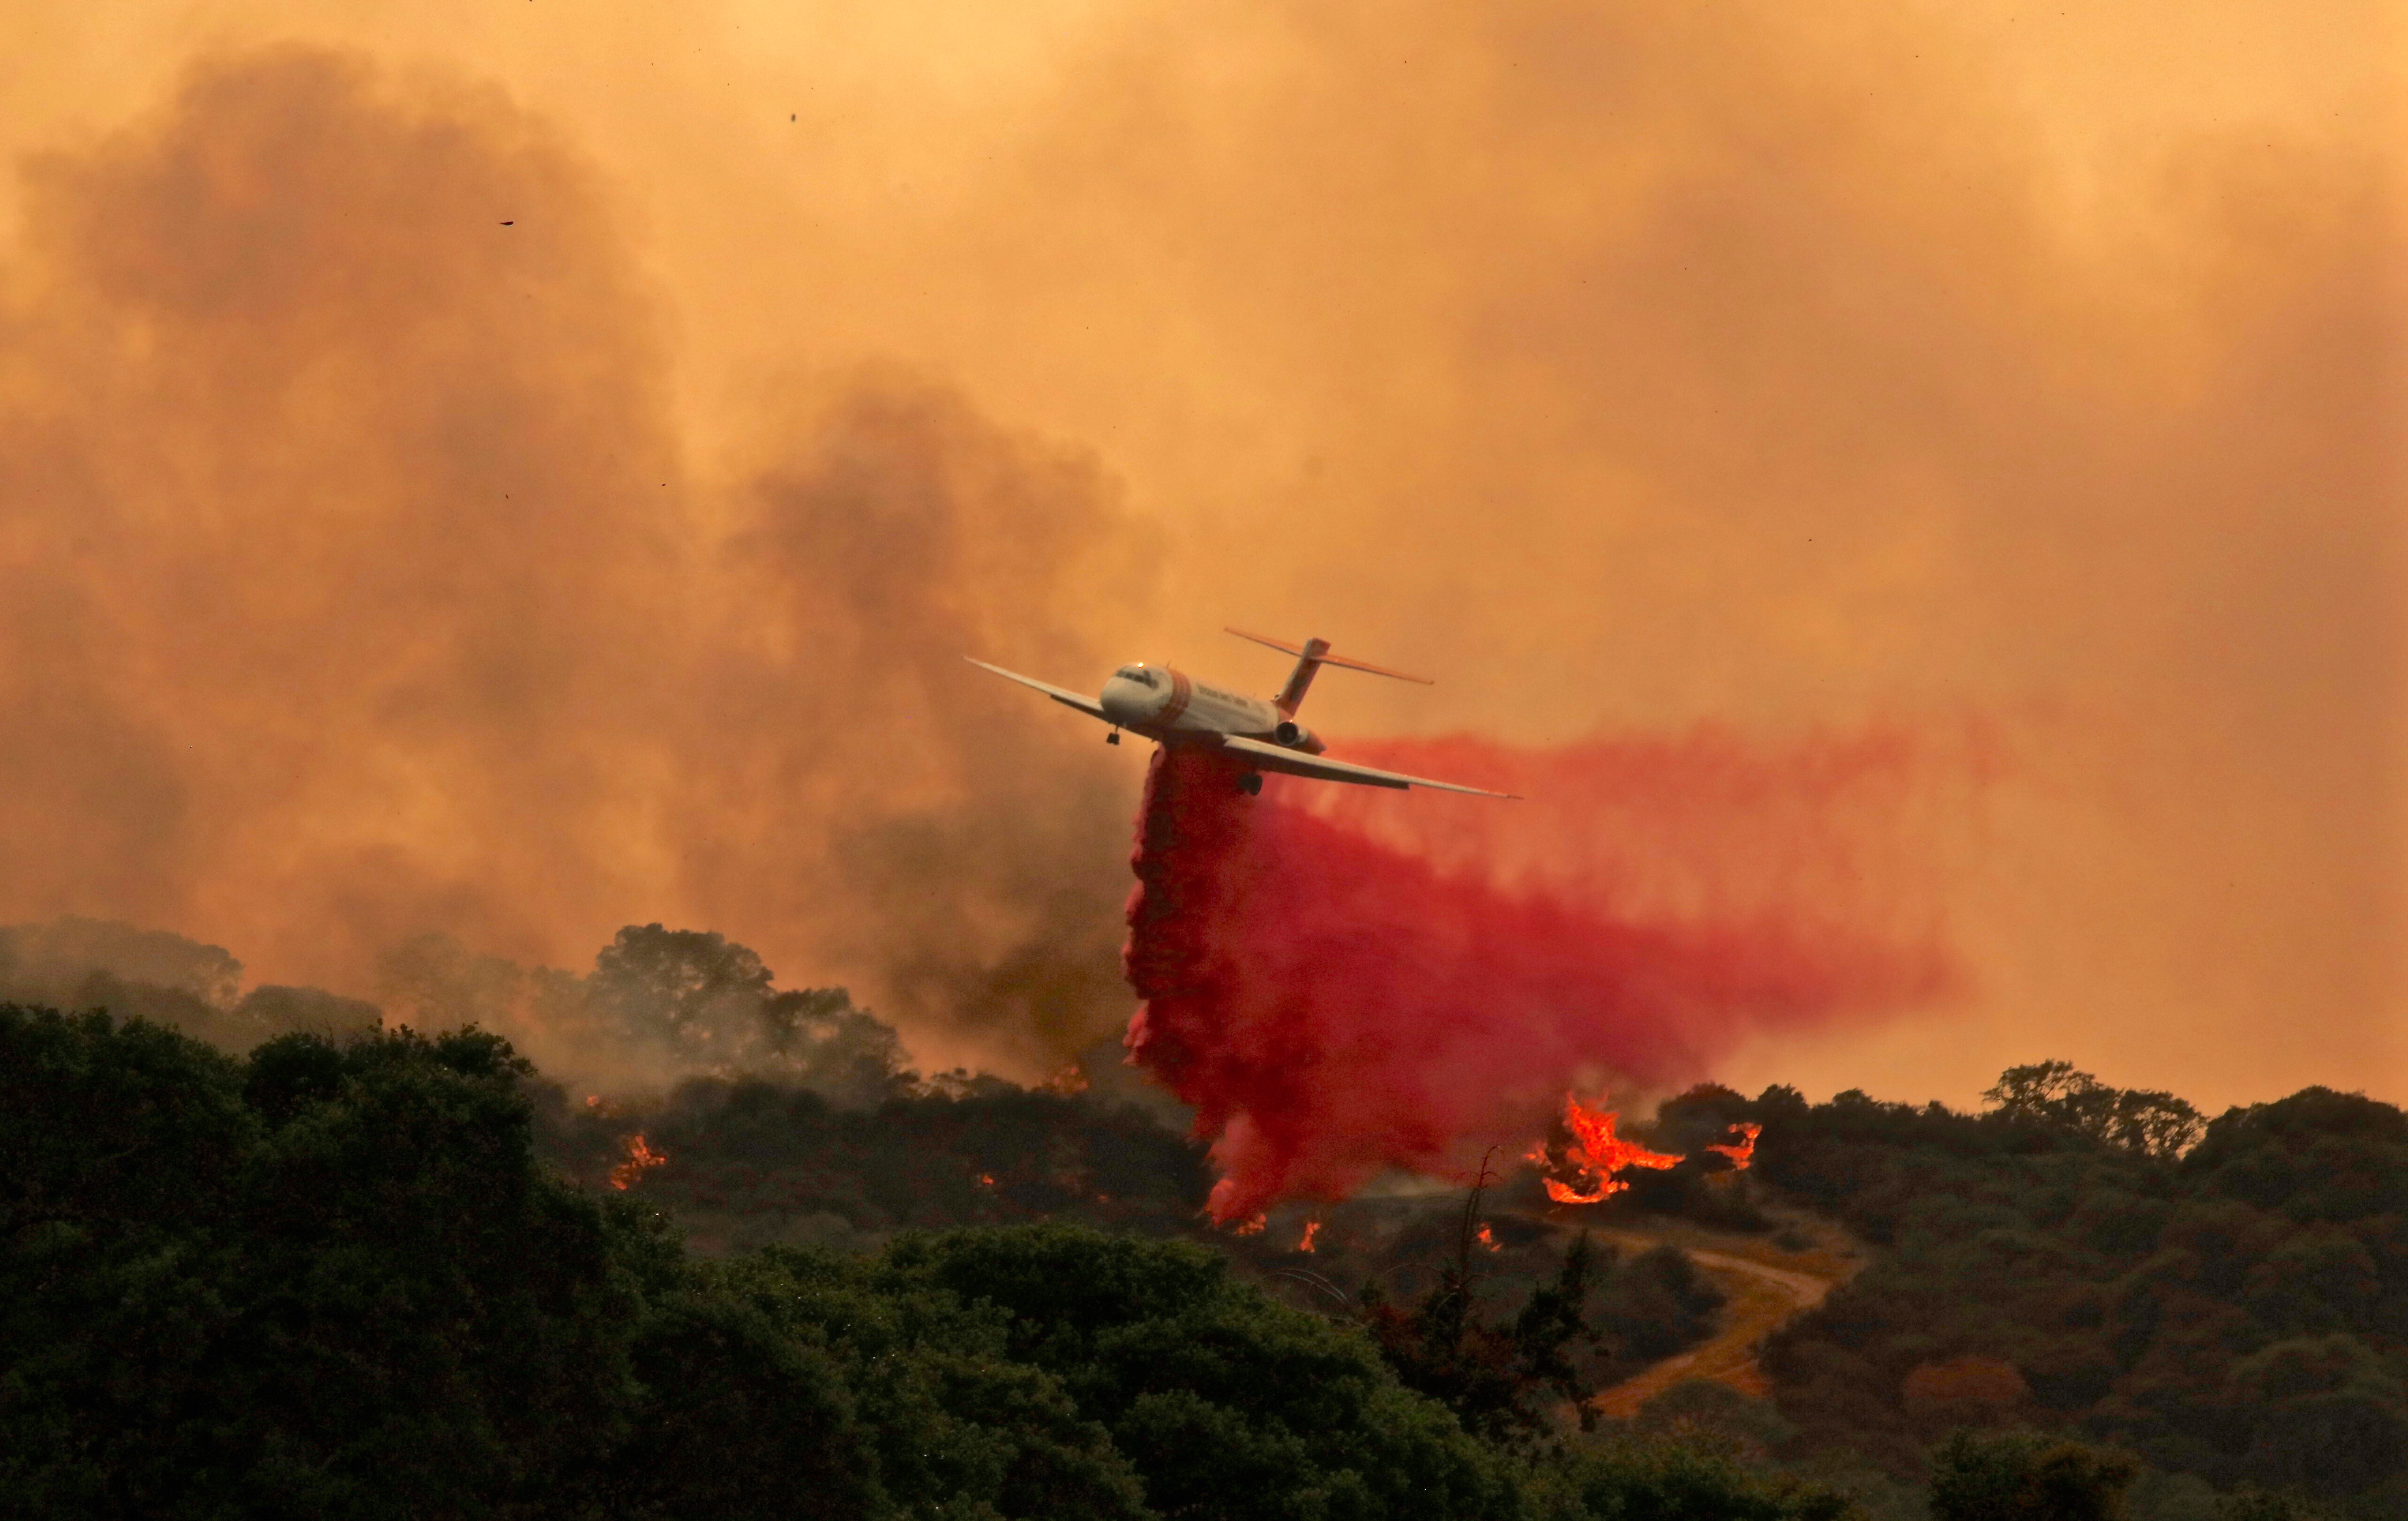 epa06919522 A firefighting plane makes a retardant drop on the River Fire portion of the Mendocino Complex Fire in Lakeport, California, USA, 29 July 2018 (issued 30 July 2018). The River and Ranch fires combined as the Mendocino Complex Fire with more than 56,000 acres (22,660 hectares) burned, nearly doubling since Sunday with more than 10,000 people already evacuated.  EPA/ALAN SIMMONS